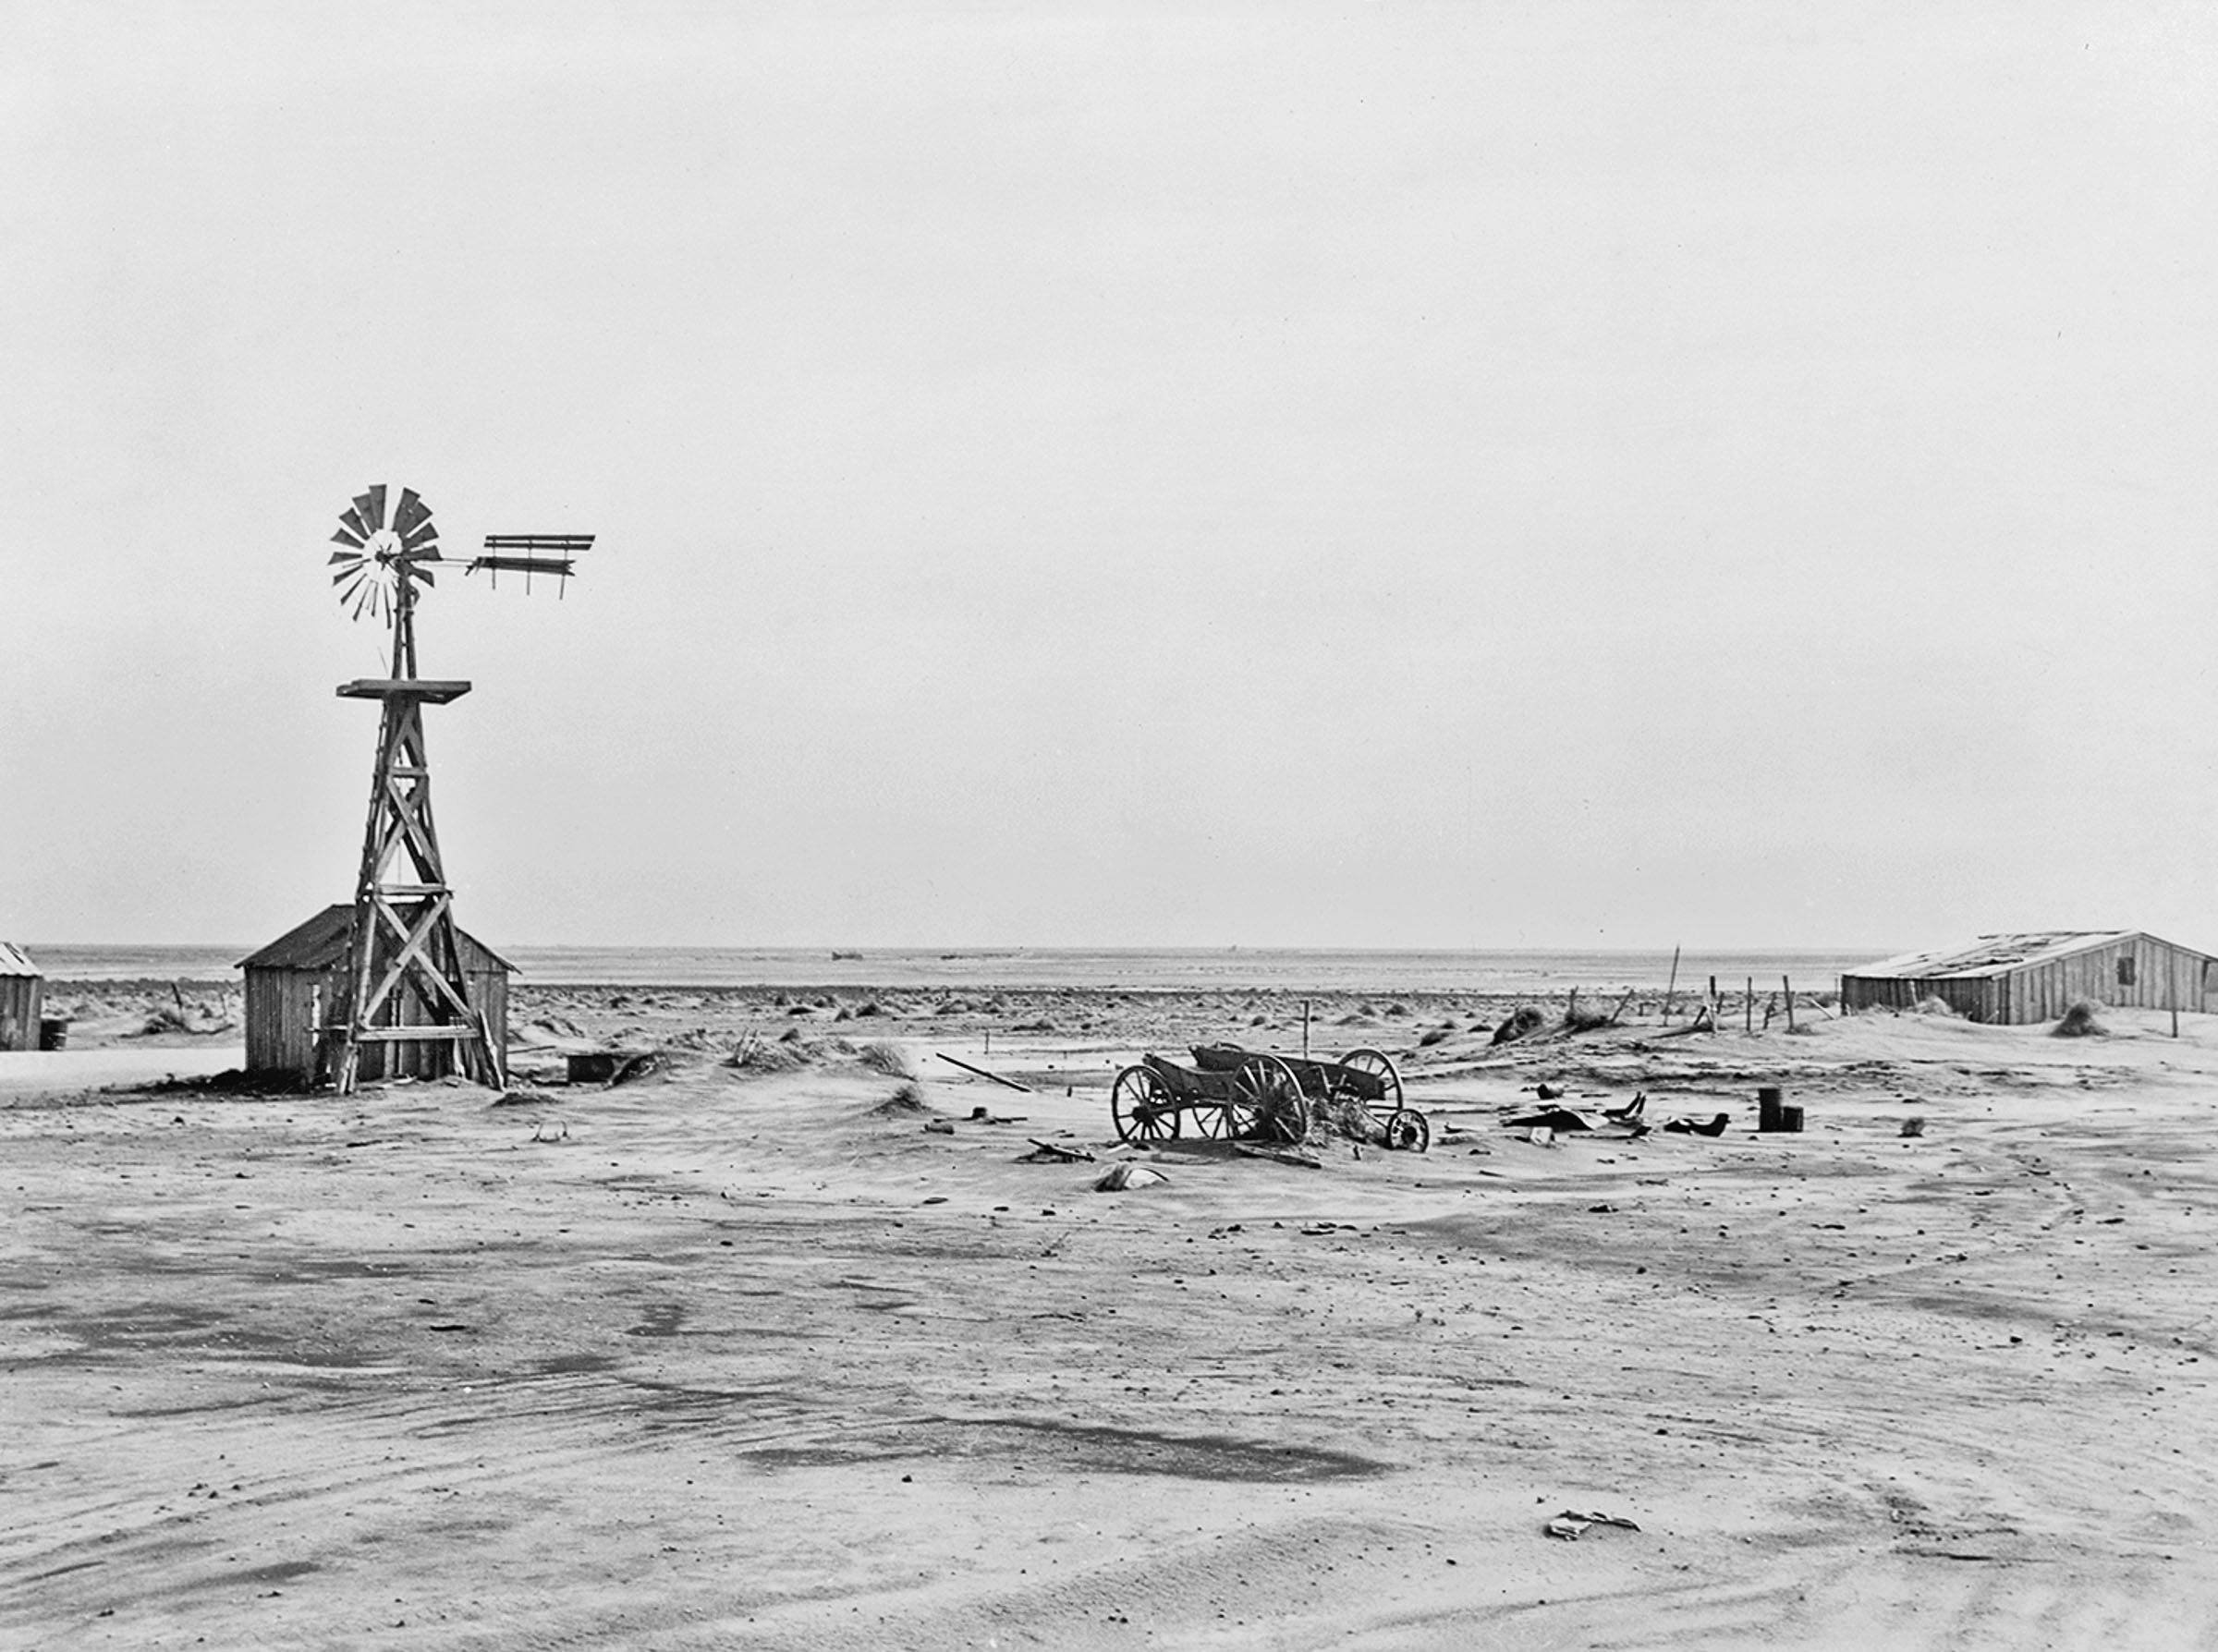 A farm with a large windmill behing hit by a dust storm